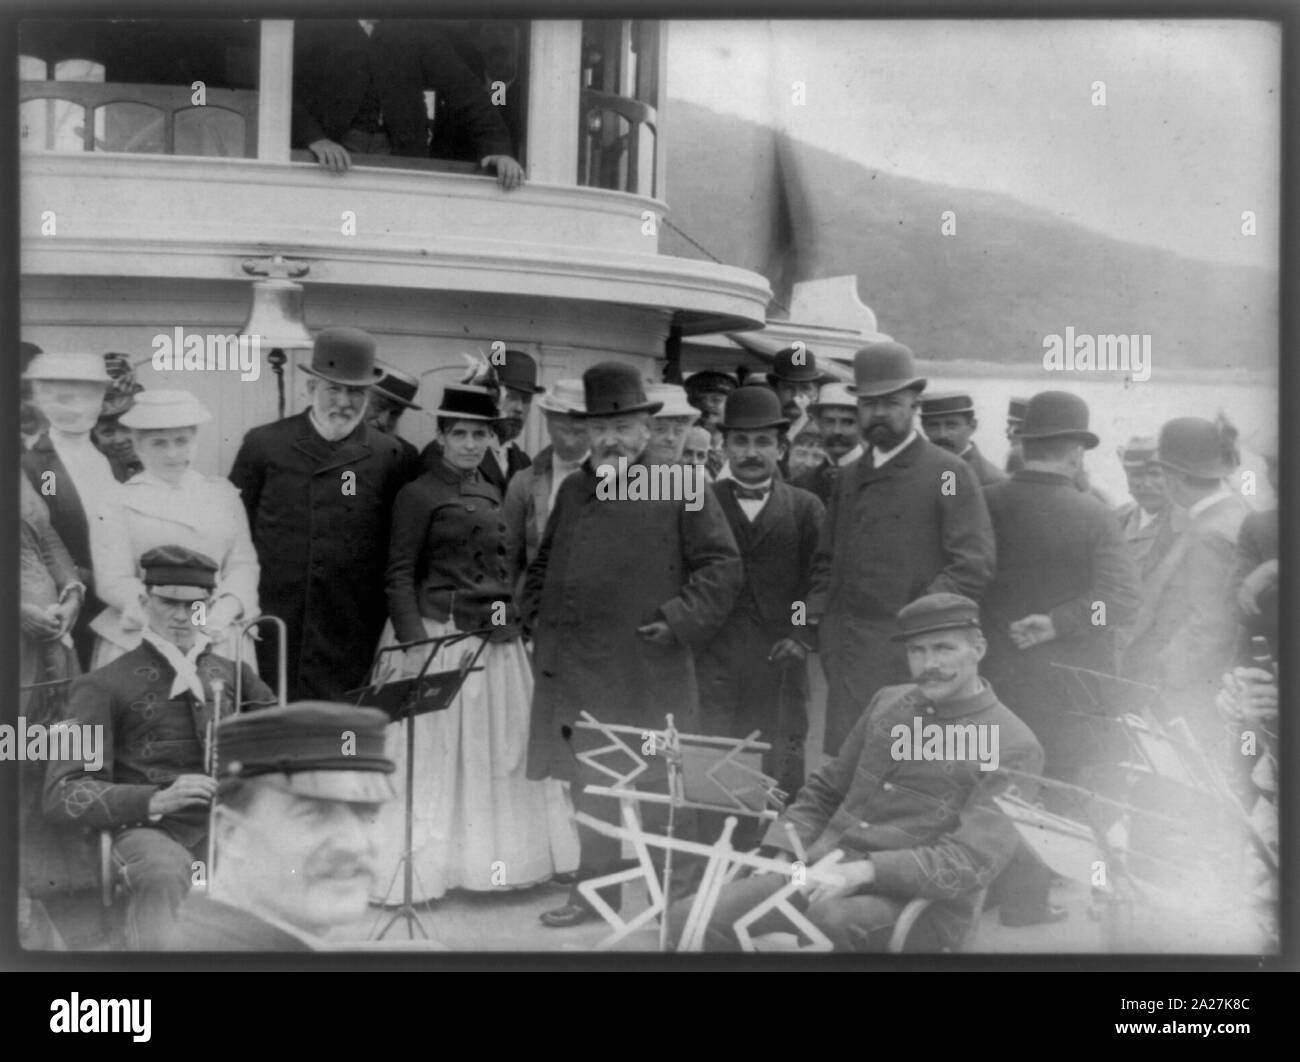 President Benjamin Harrison with James G. Blaine, Secretary of State, Henry Cabot Lodge, and group of other people posed, possibly on the forward deck of the Frenchman's Bay steamer Sappho, with several men of the Bar Harbor Band, Maine() Stock Photo